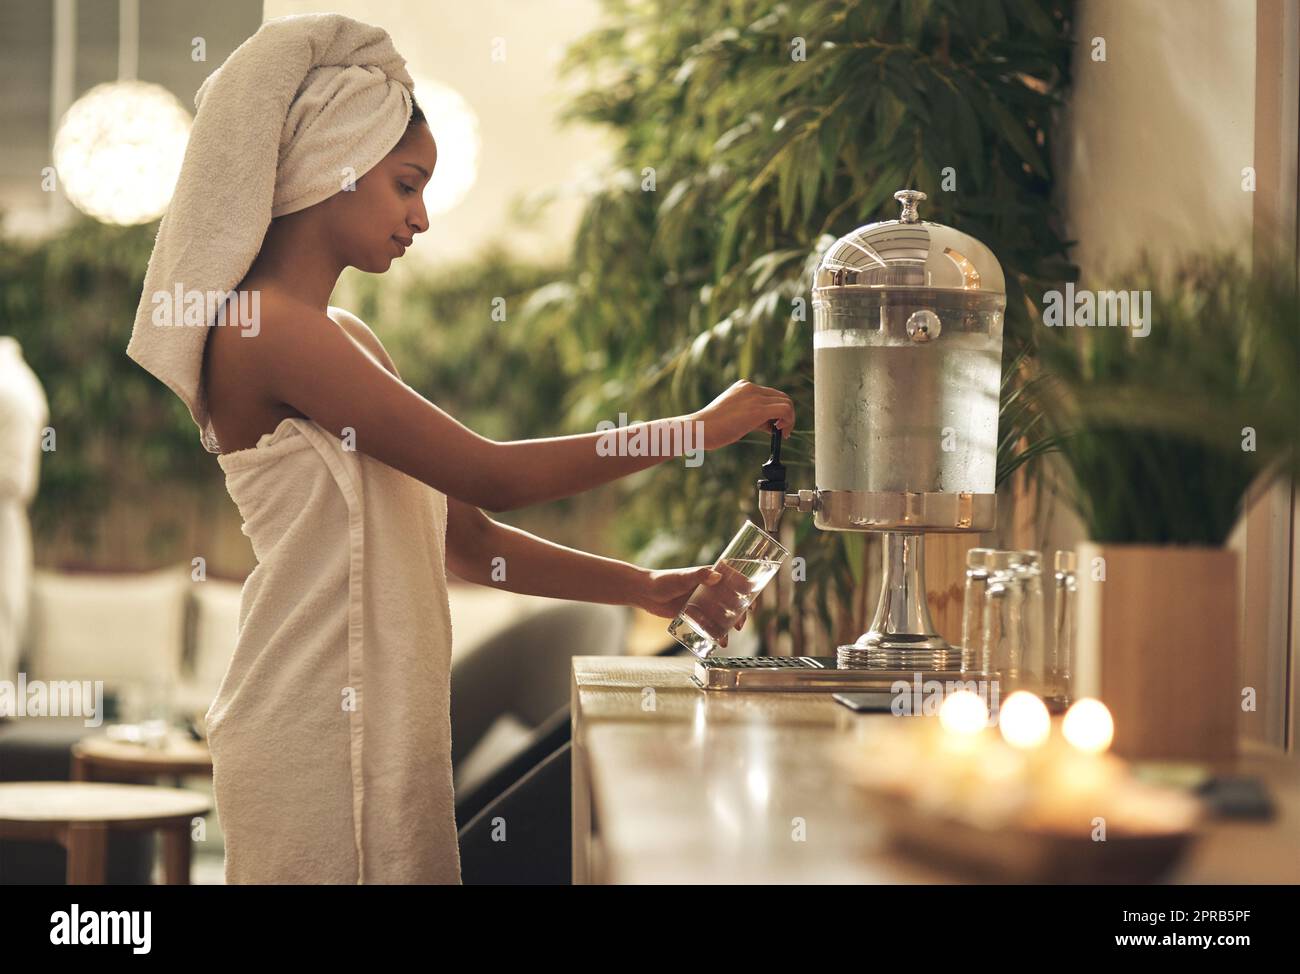 A spa day leaves me feeling lighter, brighter and more in control. a woman filling her glass at a water dispenser in a day spa. Stock Photo